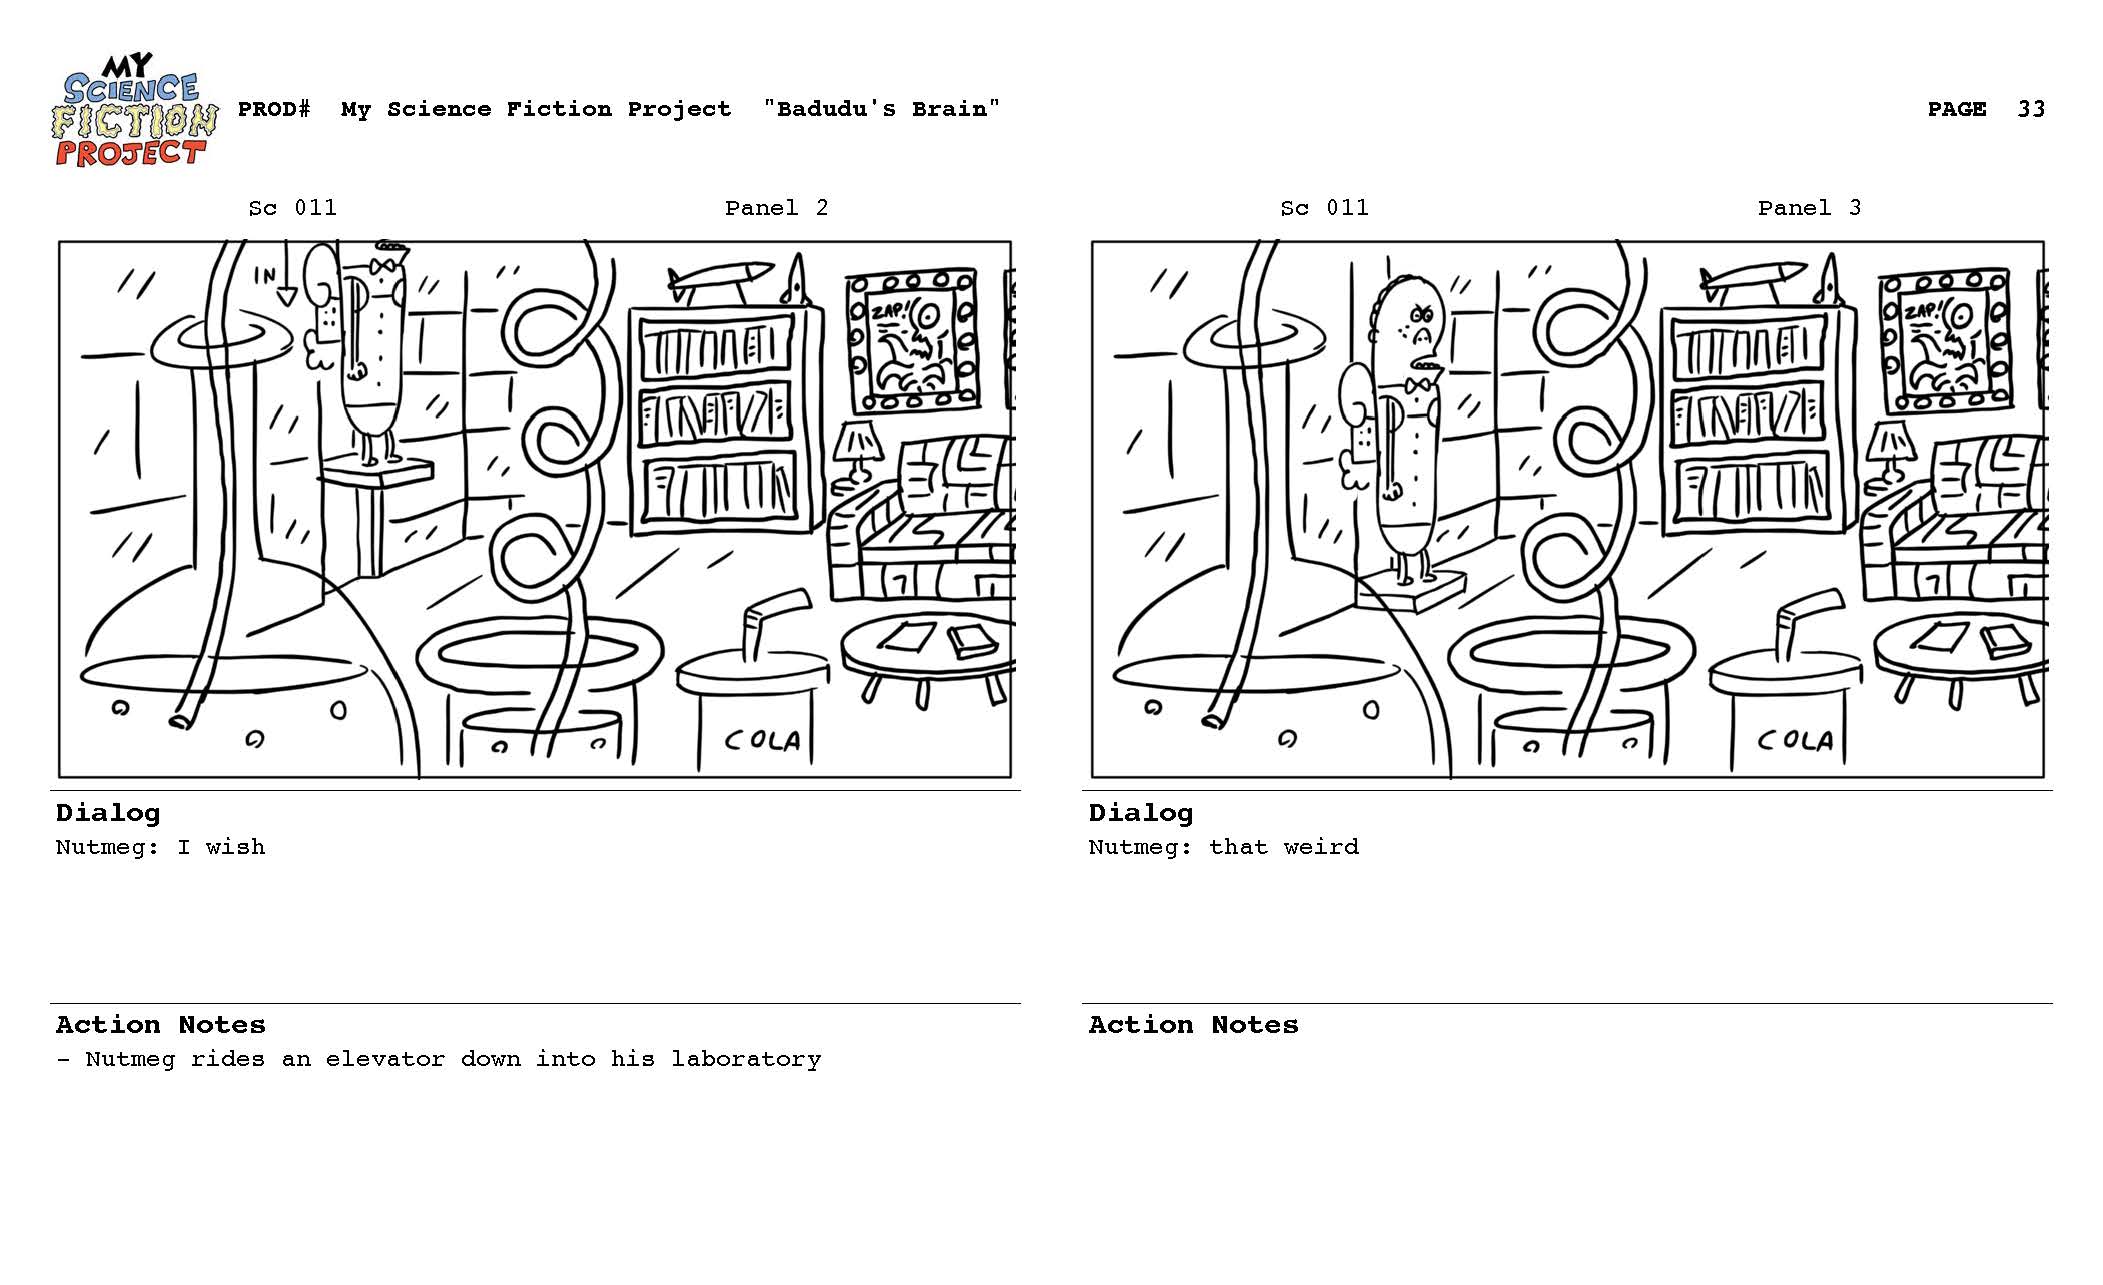 My_Science_Fiction_Project_SB_083112_reduced_Page_033.jpg